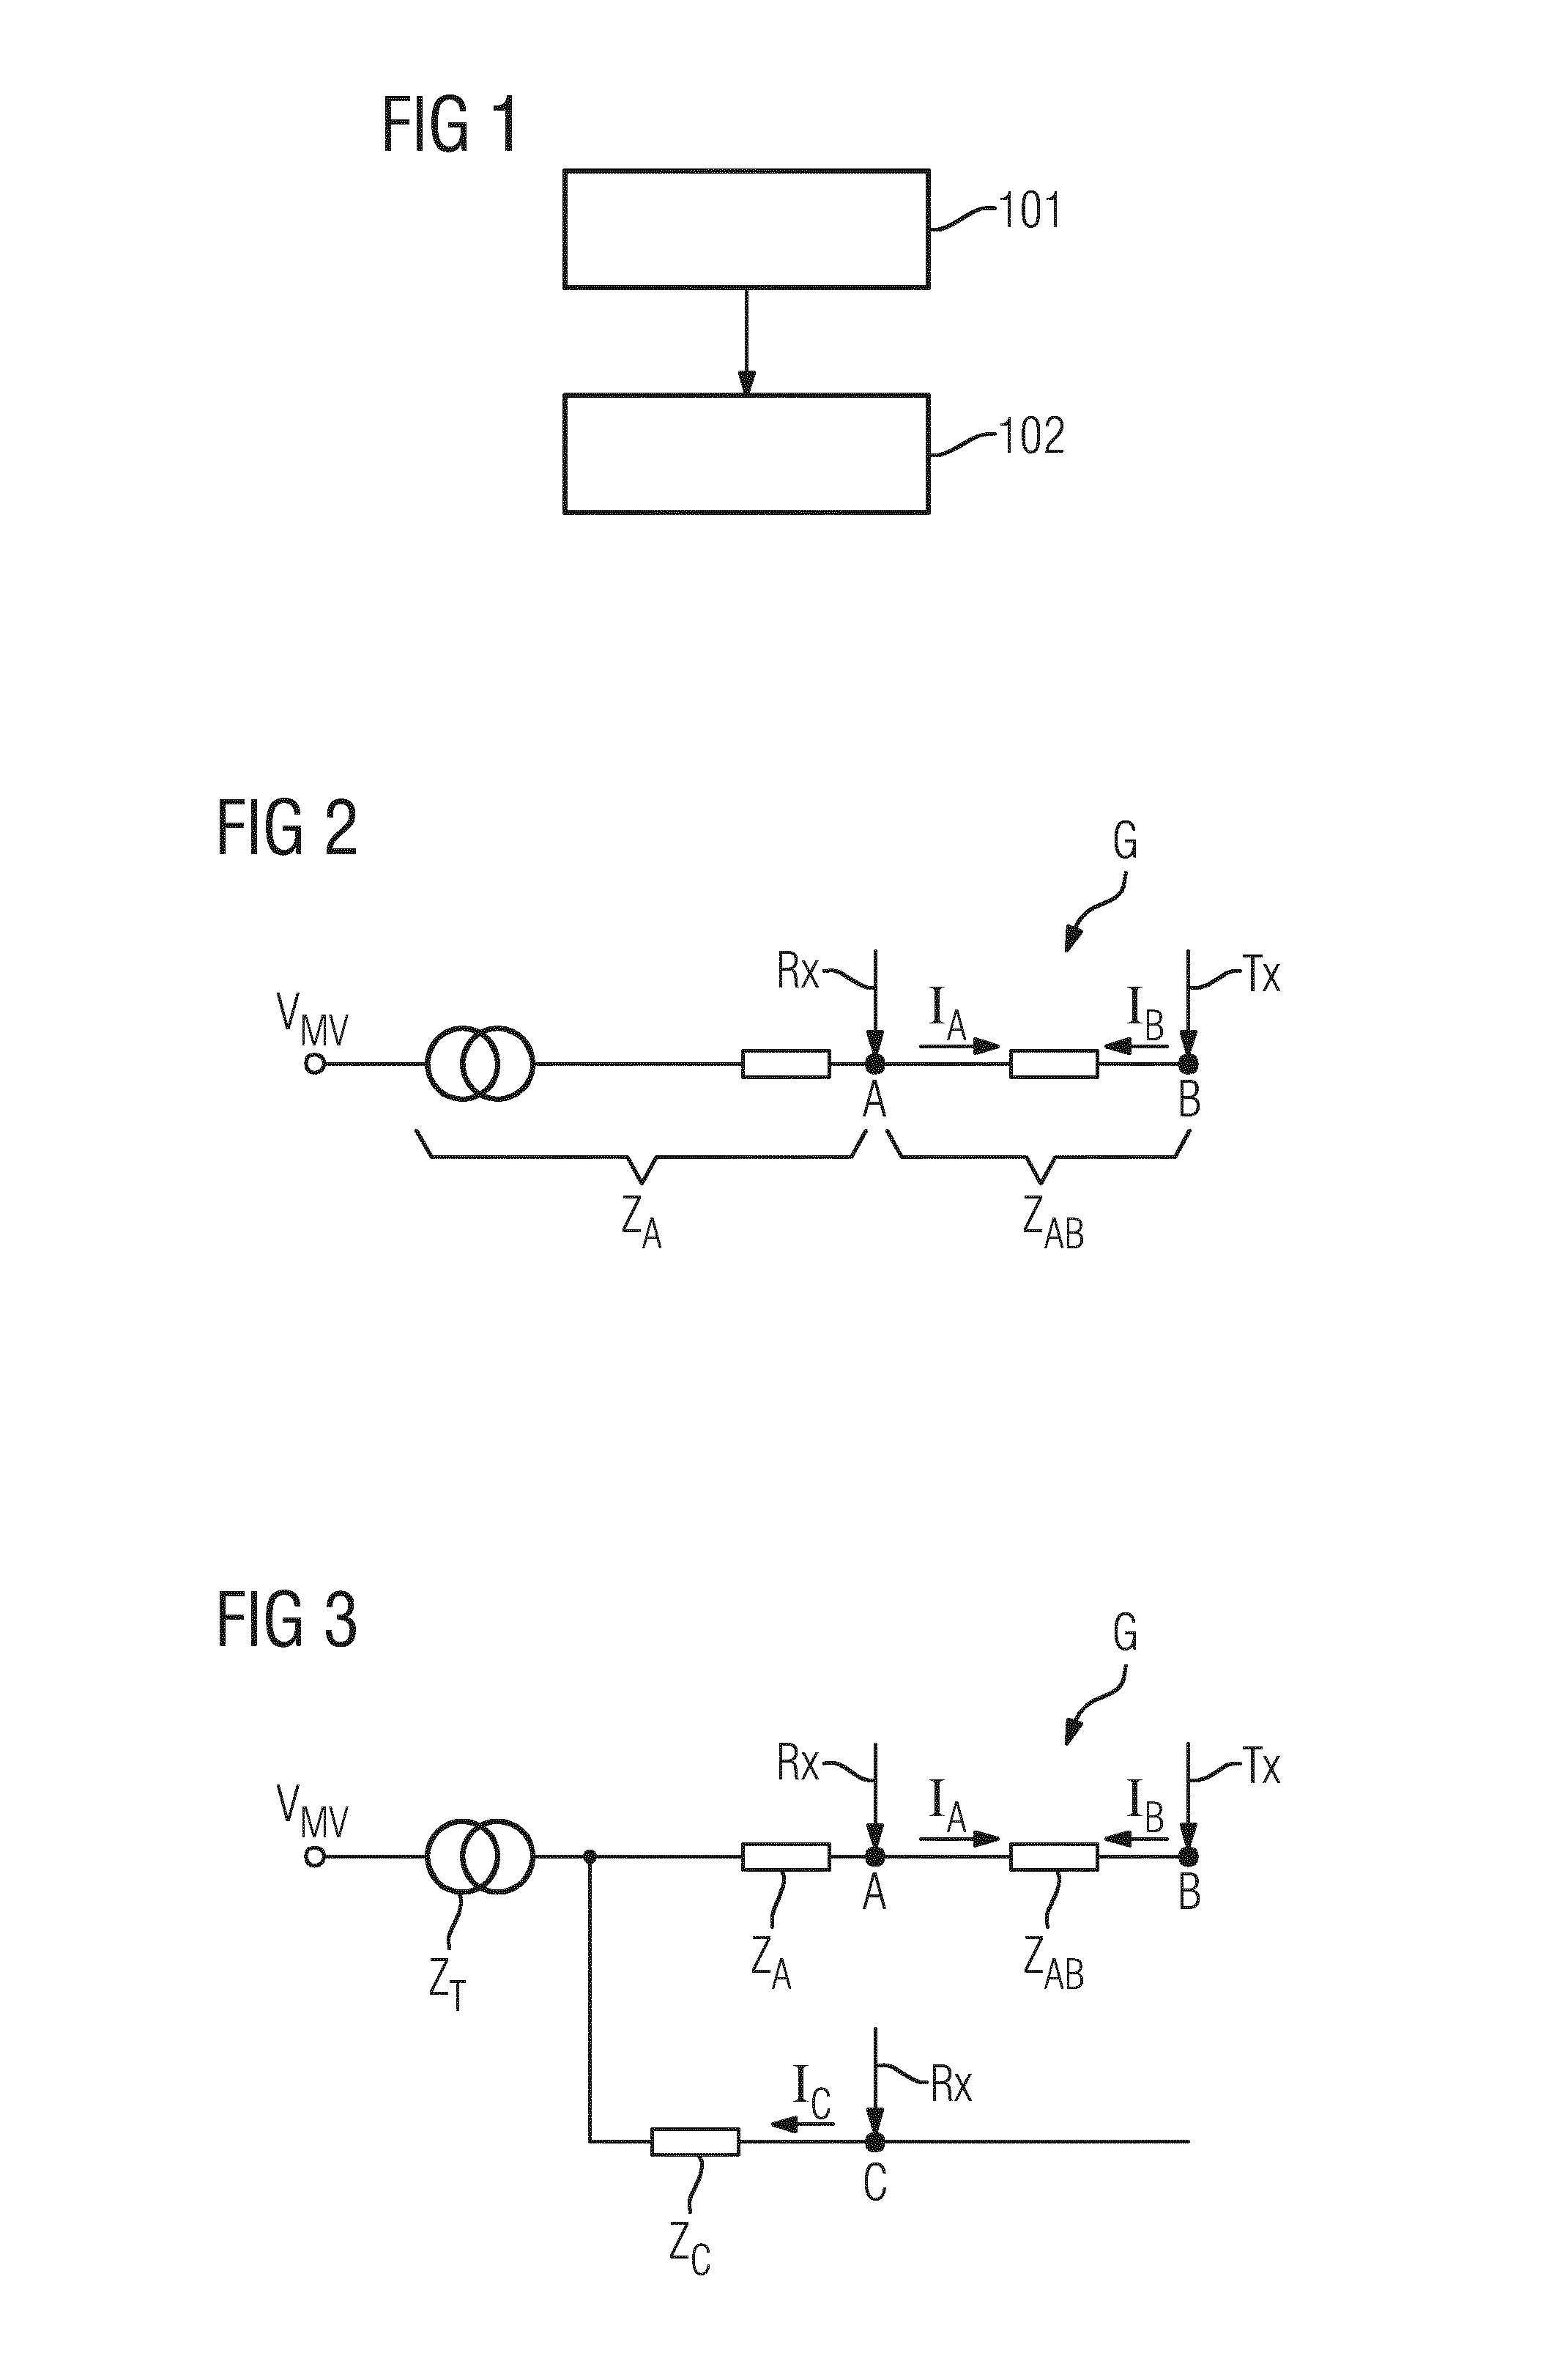 Signaling and controlling a power grid coupling actuators